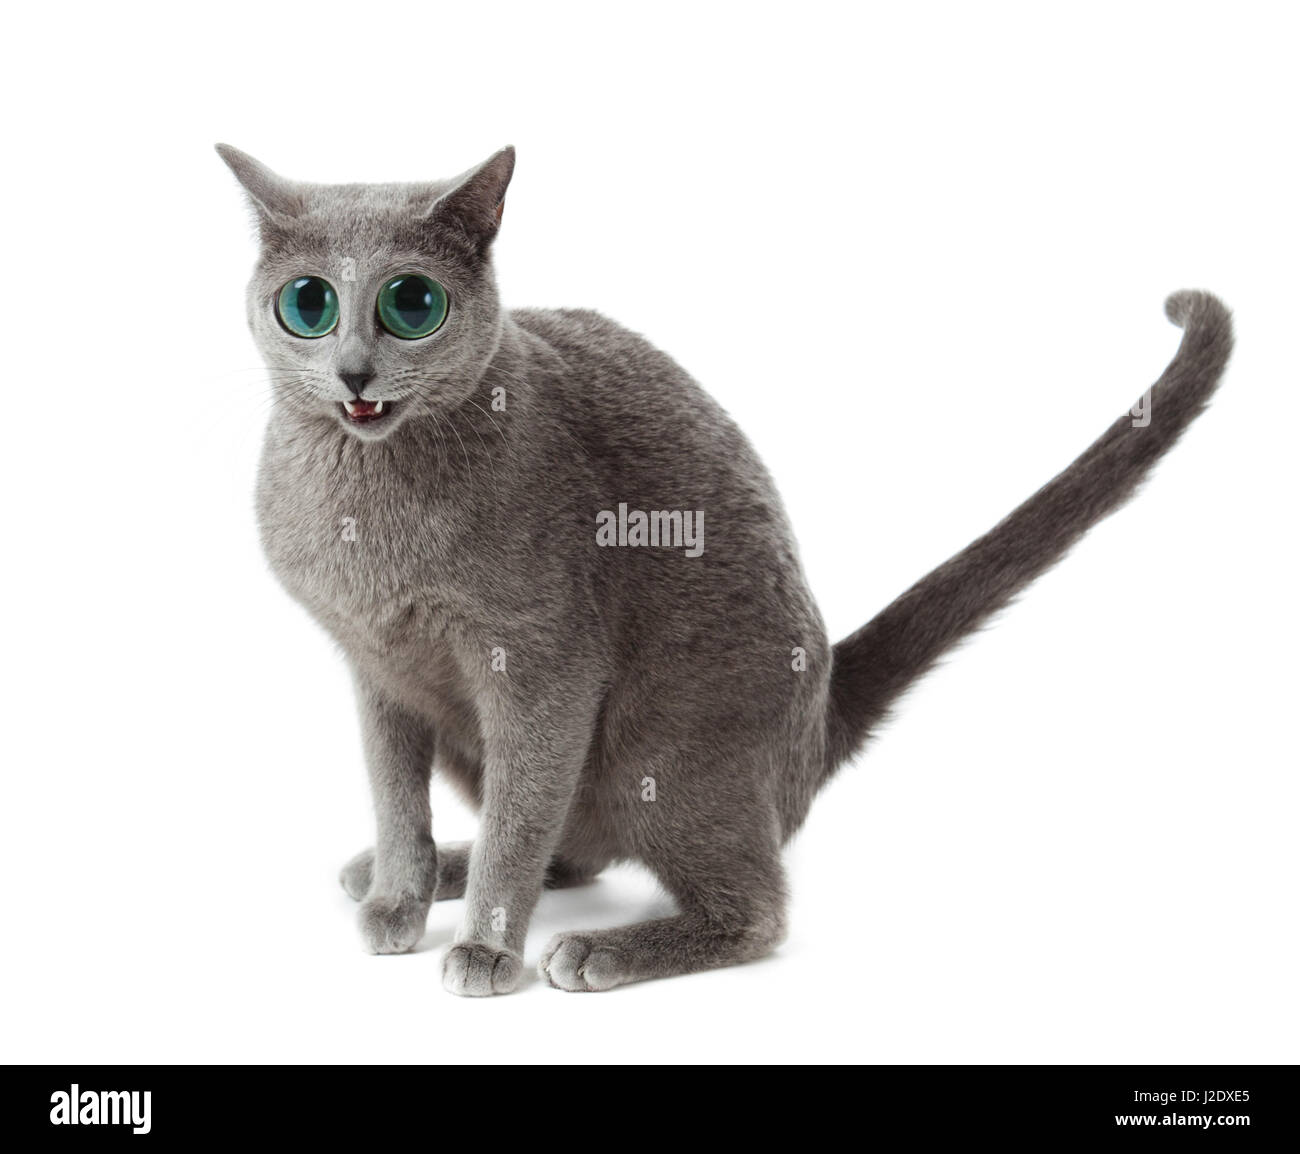 Russian Blue cat. funny surprised cat Stock Photo - Alamy